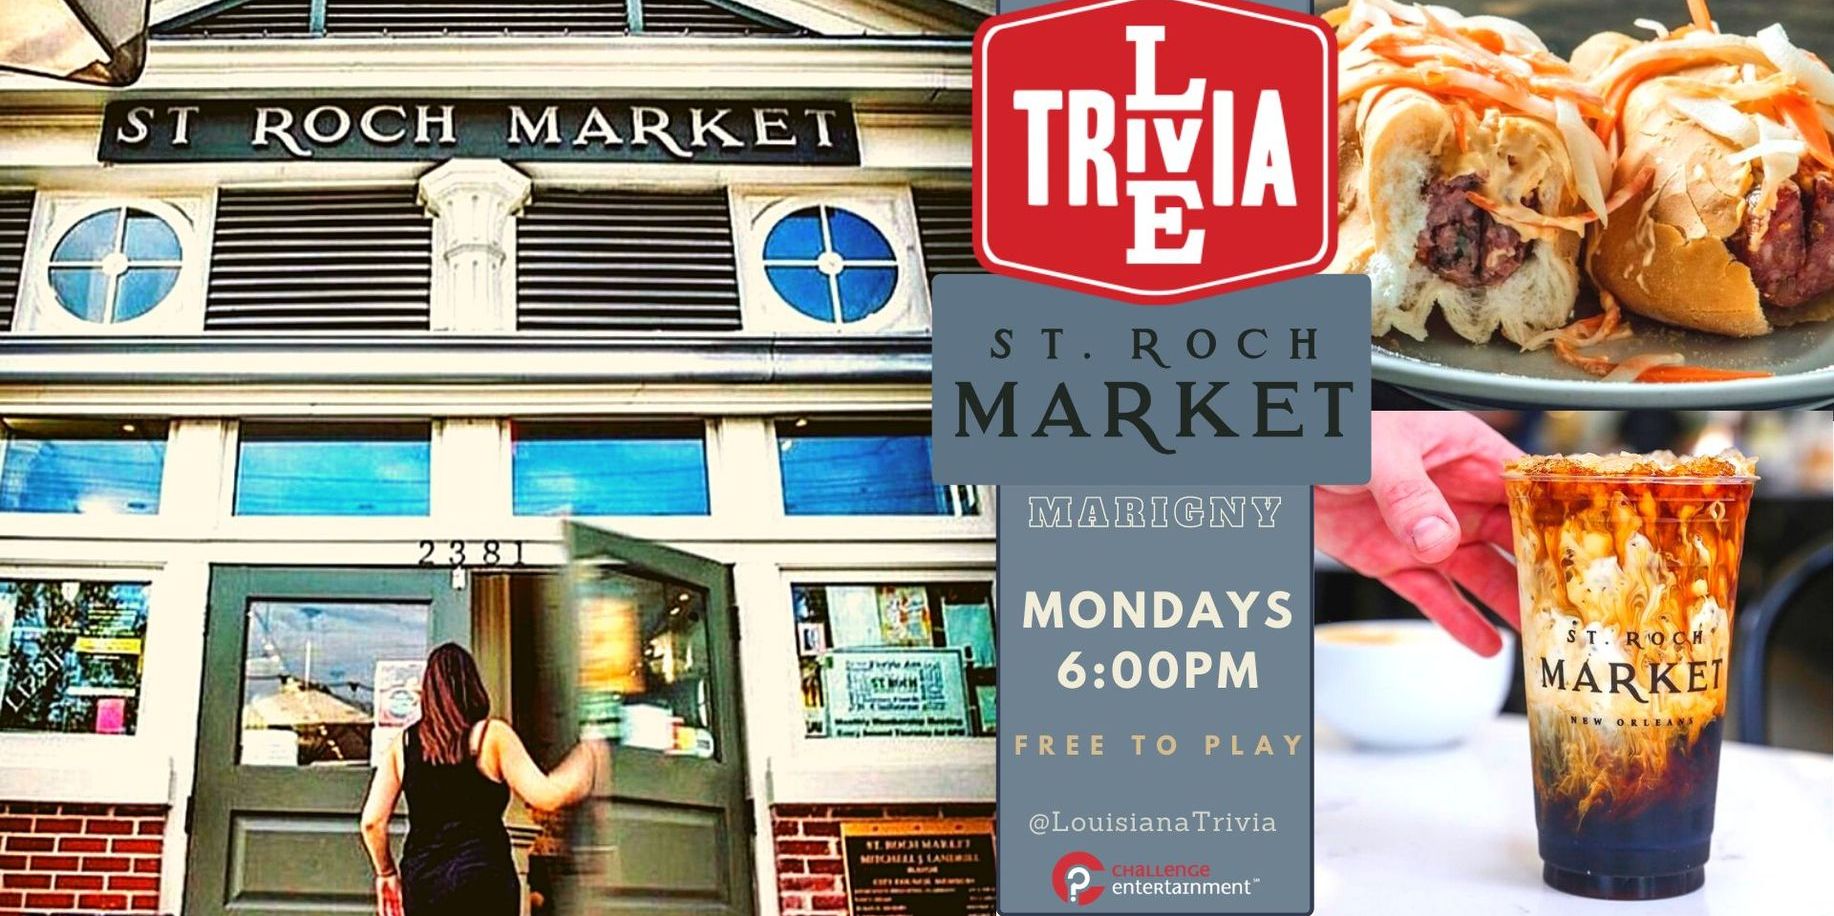 Live Trivia at St. Roch Market promotional image